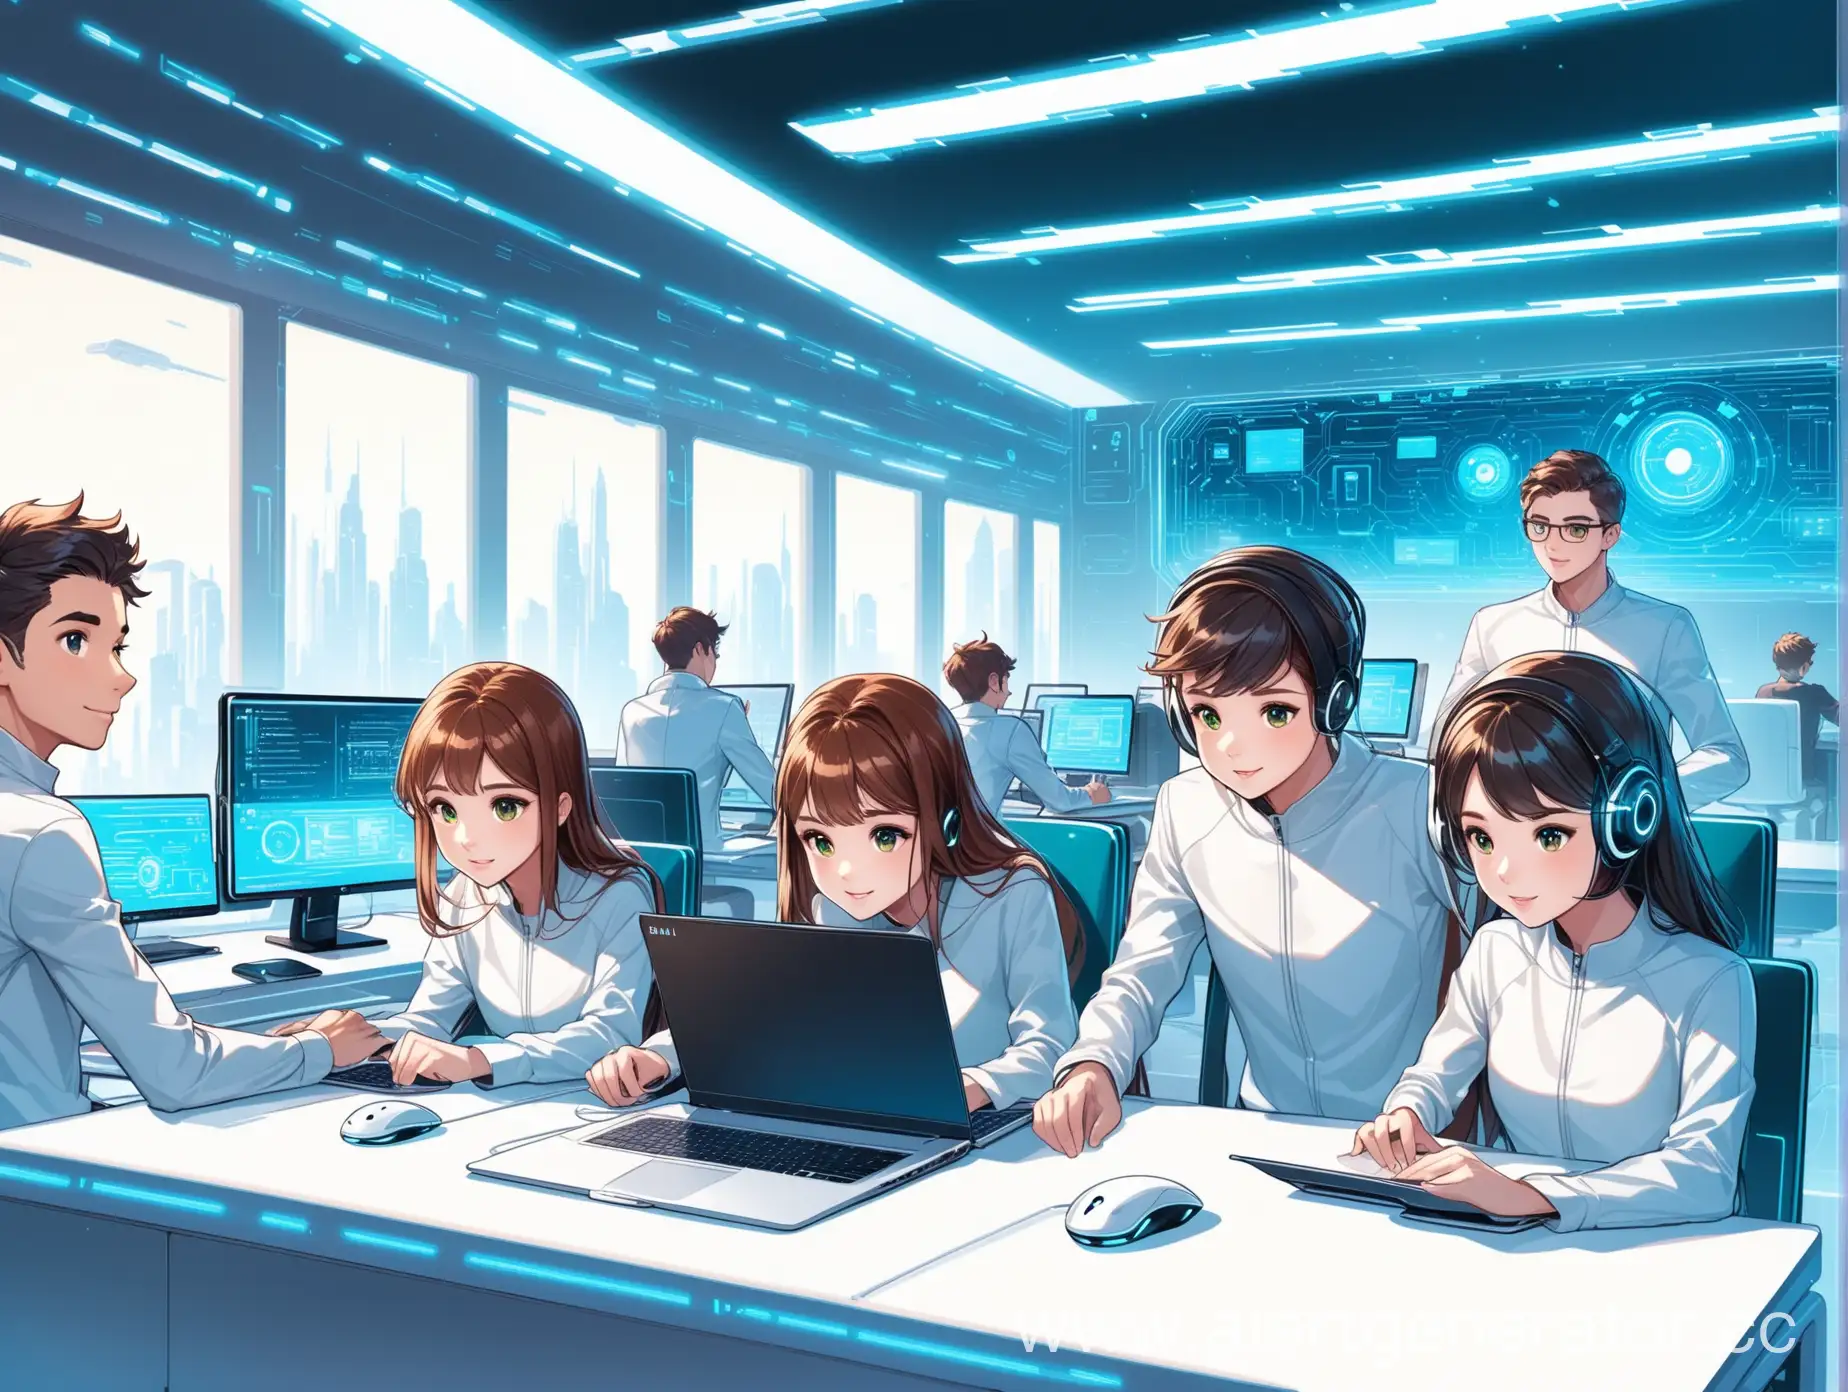 Cartoon staill, teamwork of students, work on artificial intelligence, two boys and girls, futuristic interior, desk with a computer, laptop, and other electronic devices, White background,